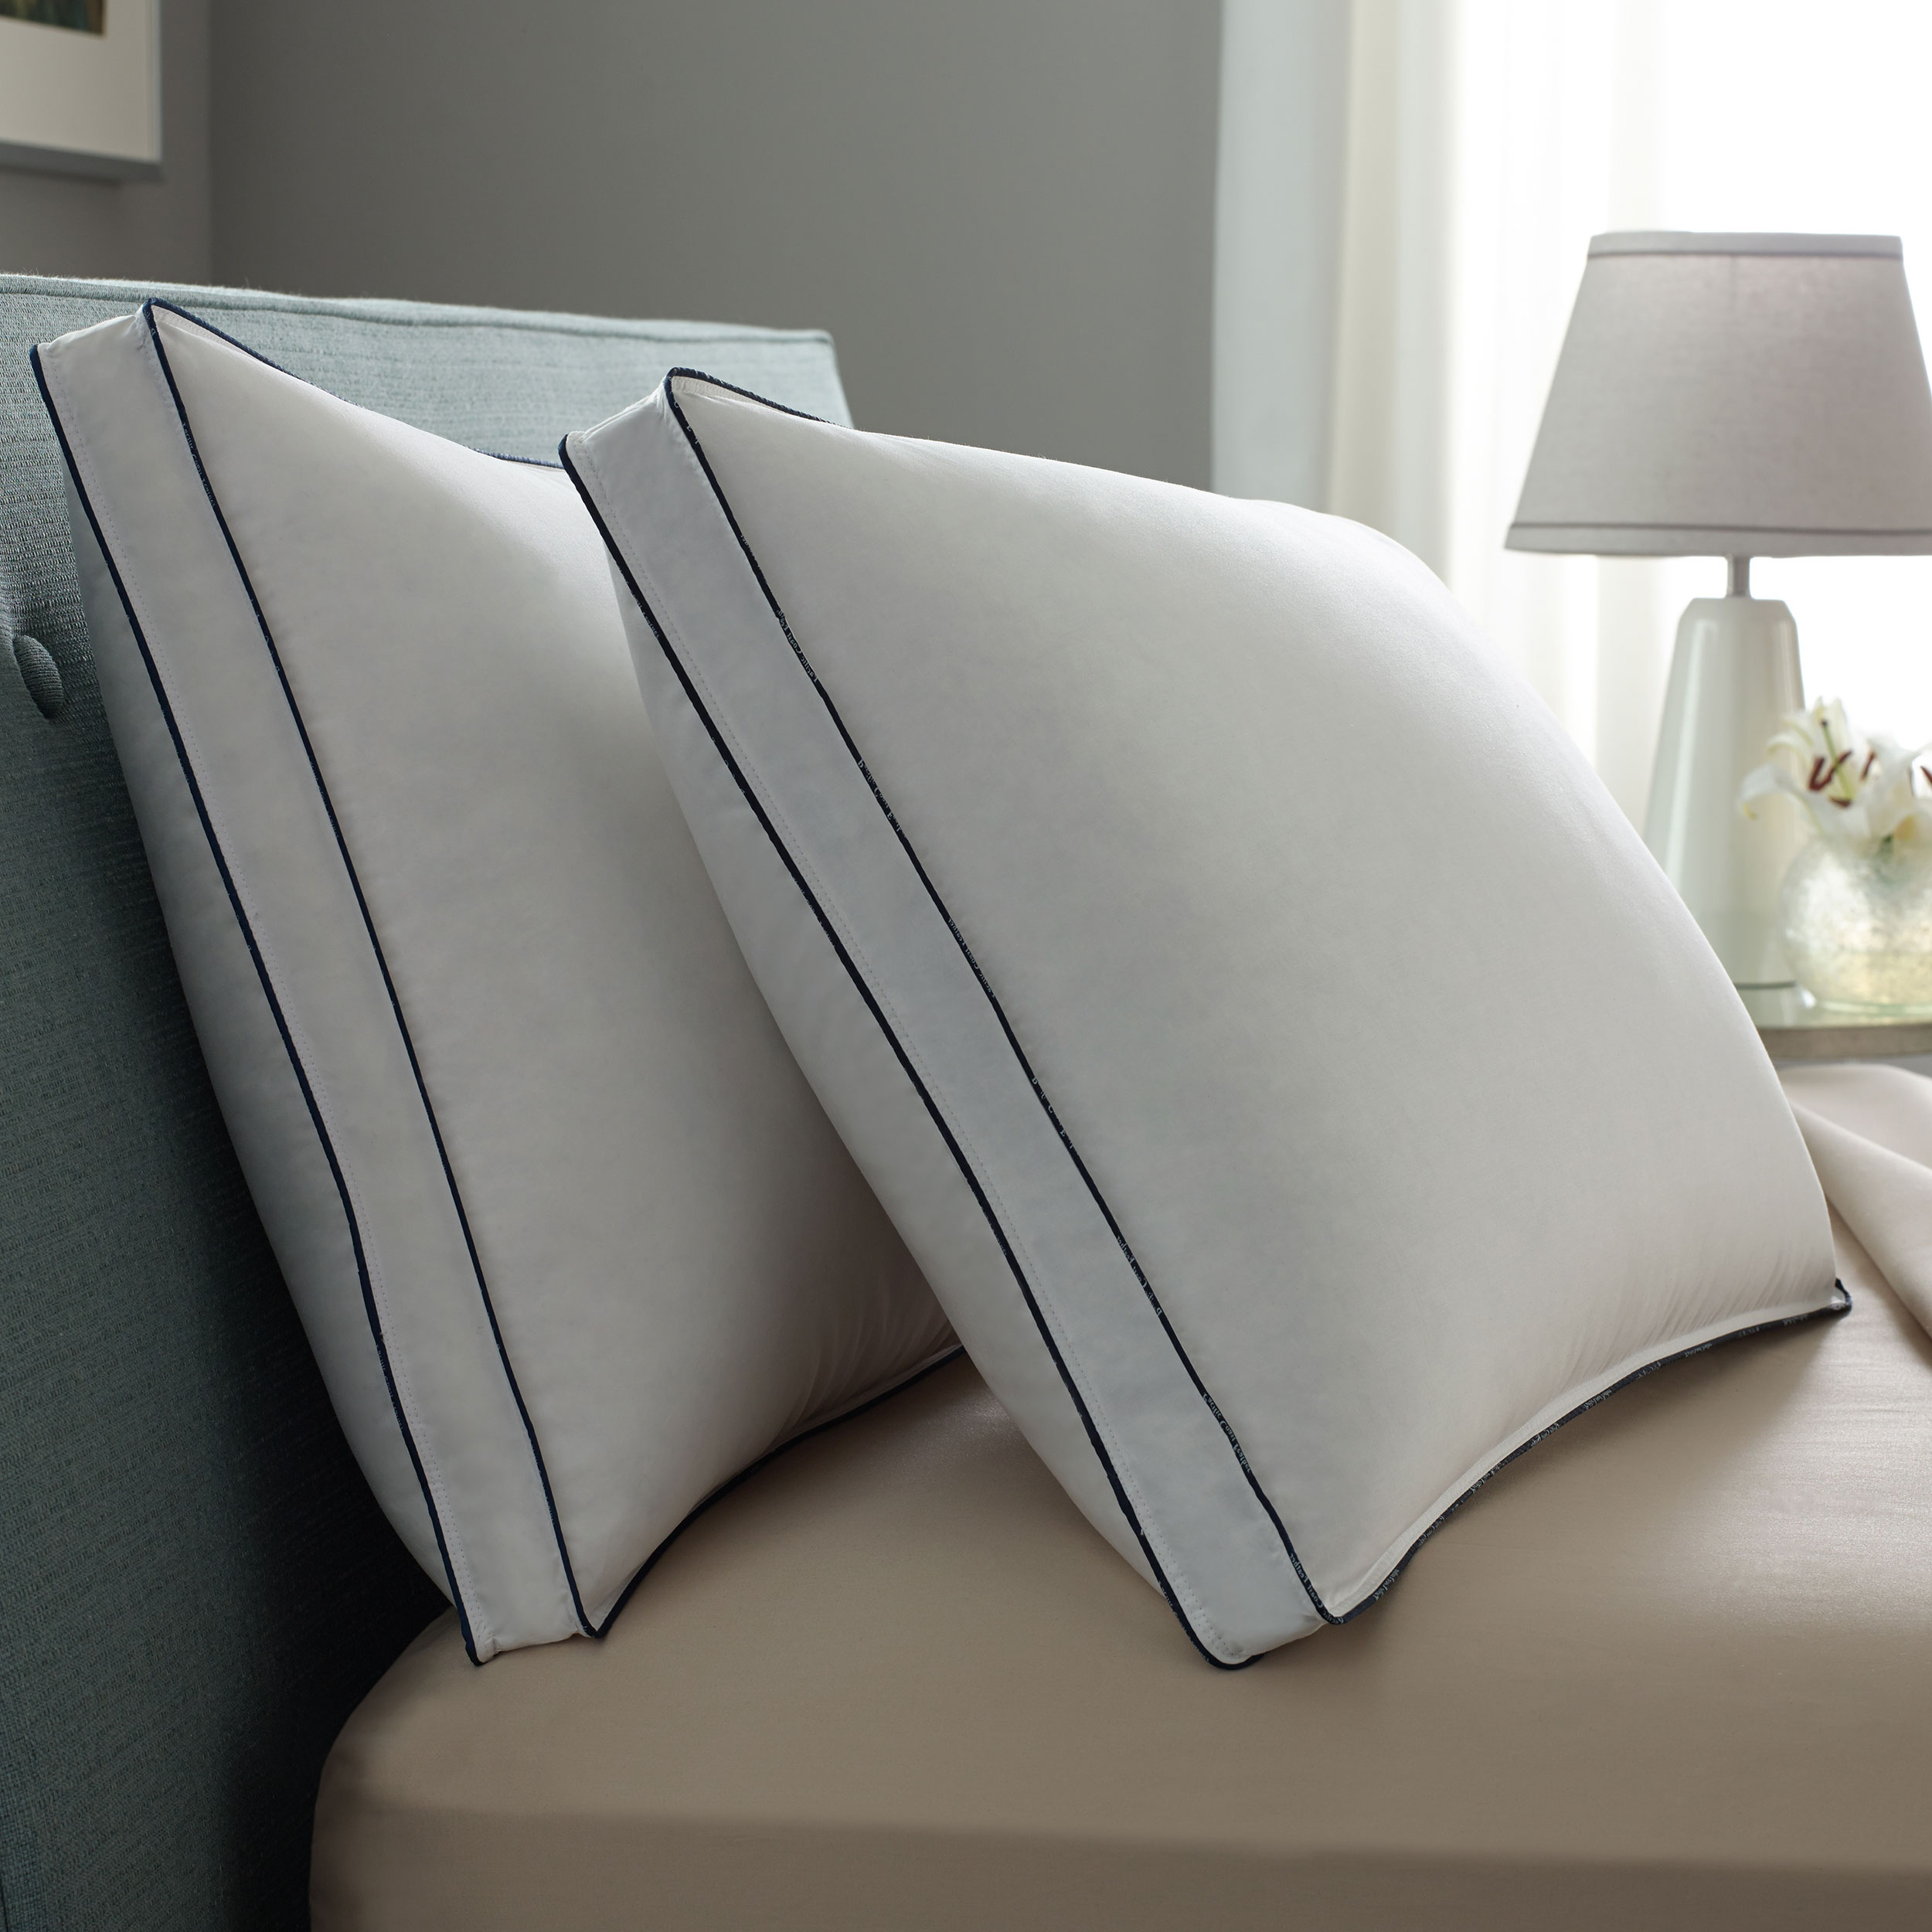 Pacific Coast Double Downaround Medium 2 Pack Pillow 300 Thread Count 550 Fill Power Down & Resilia Feathers - Queen